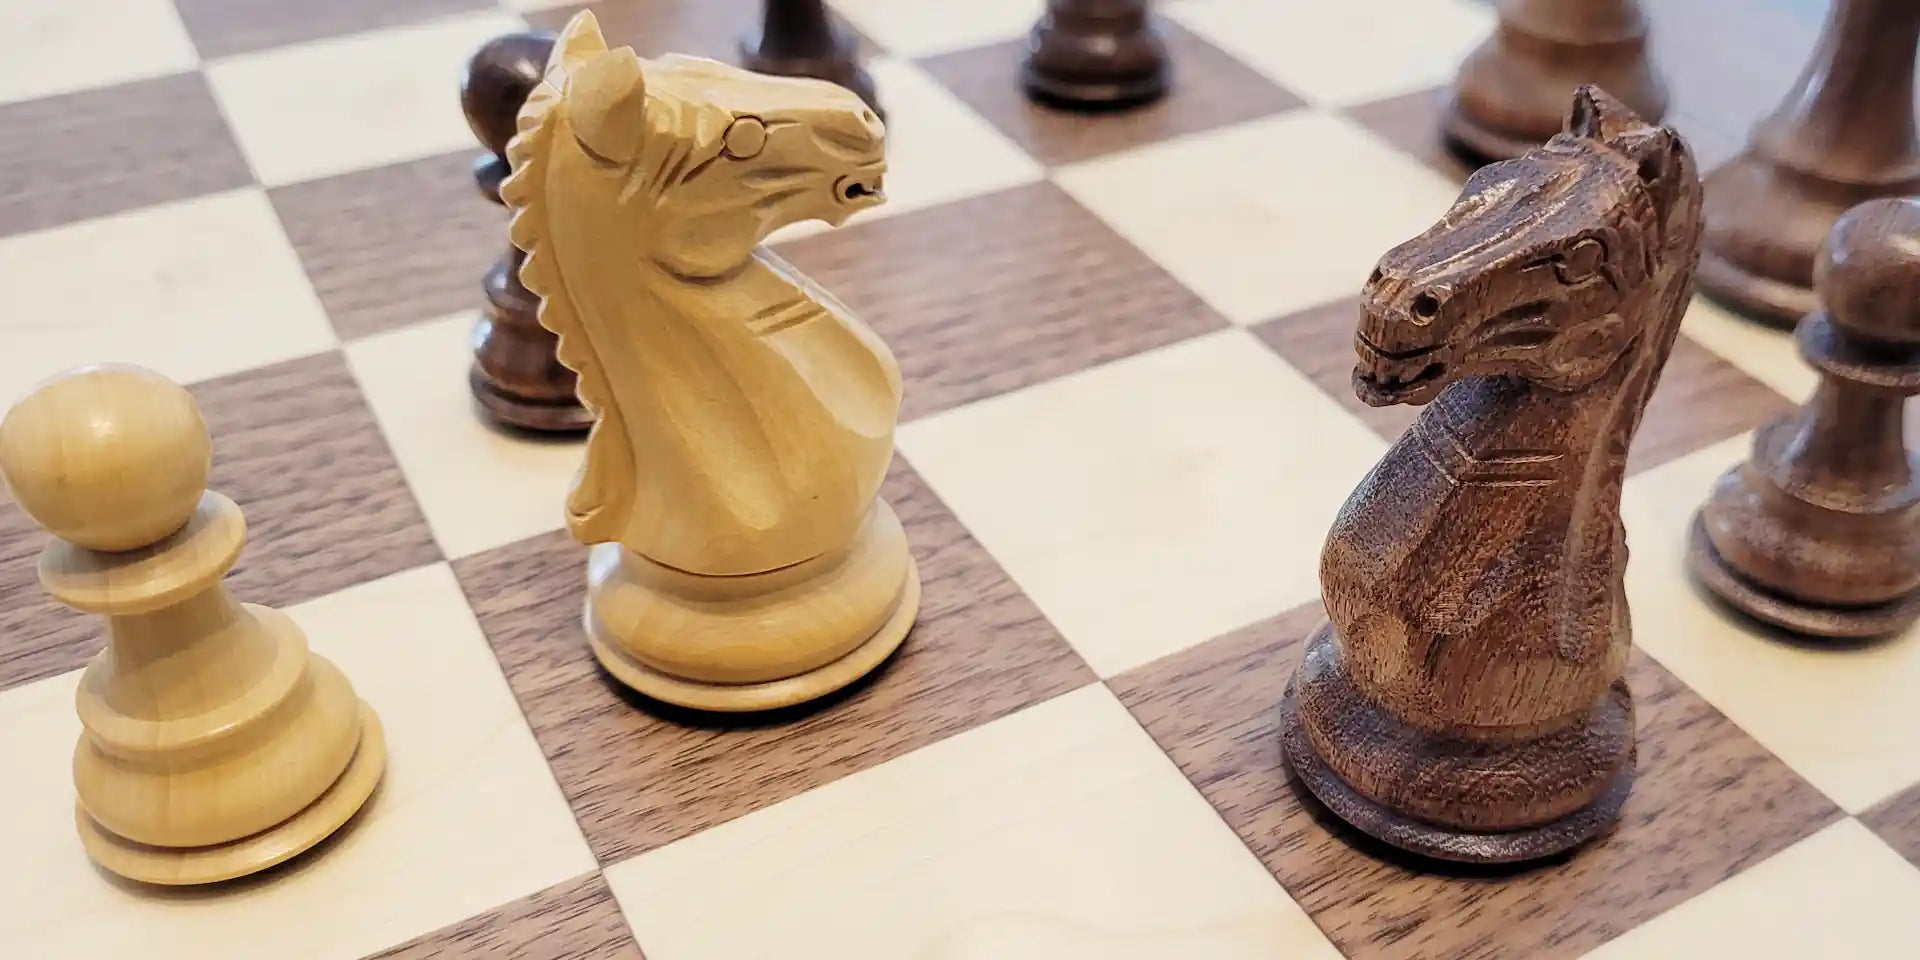 Chess pieces, Chess, Chess set